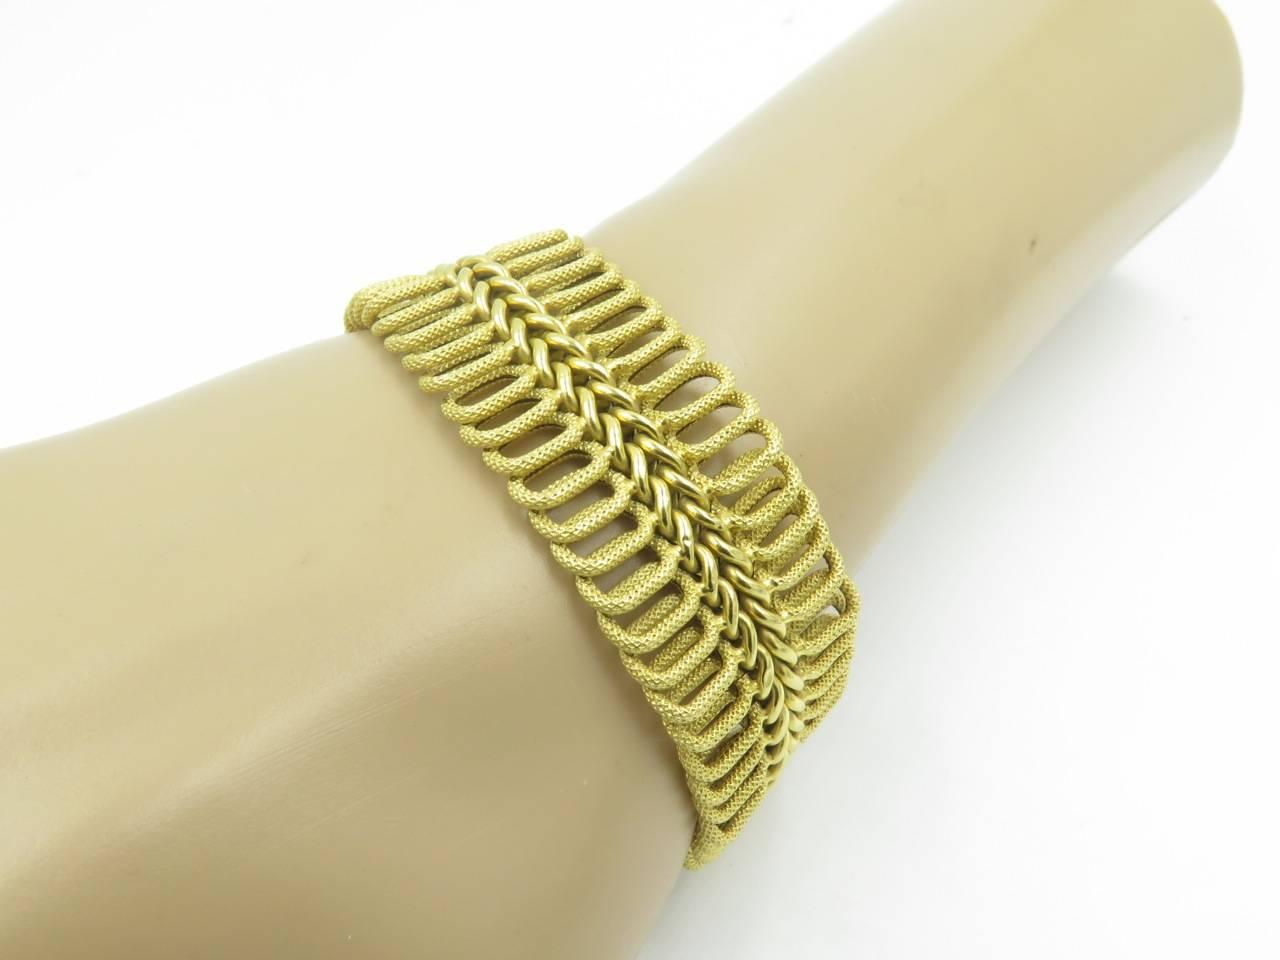 An 18 karat yellow gold bracelet.  Italian. The flexible band is composed of two rows of interlocking textured oval links, centering a polished gold braid. Length is approximately 7 1/4 inches.  Gross weight is approximately 33.6 grams. Stamped